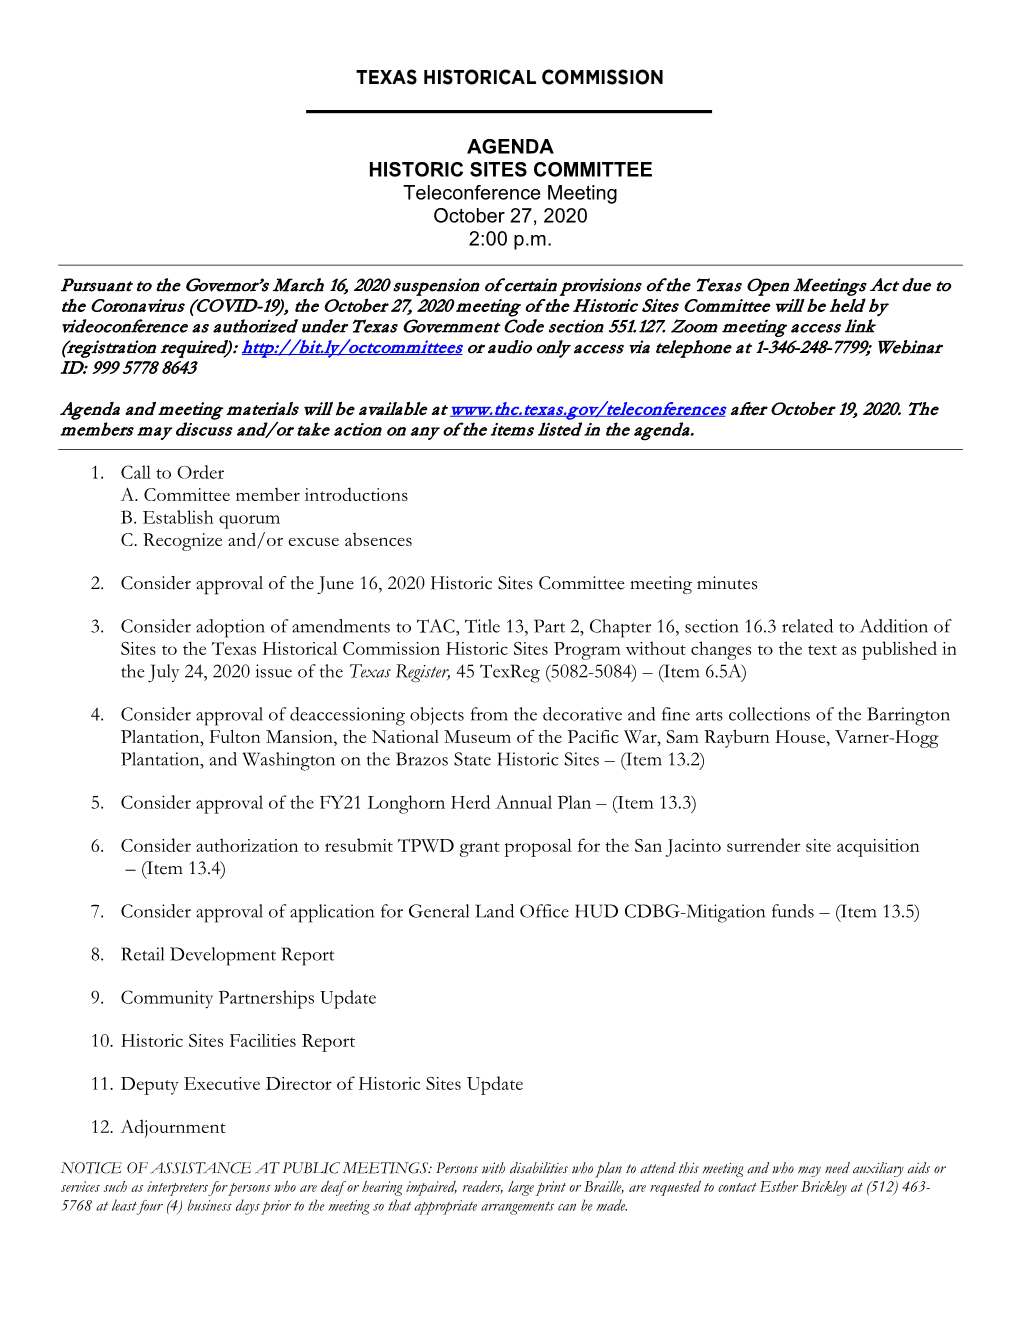 Historic Sites Committee Meeting Agenda and Packet